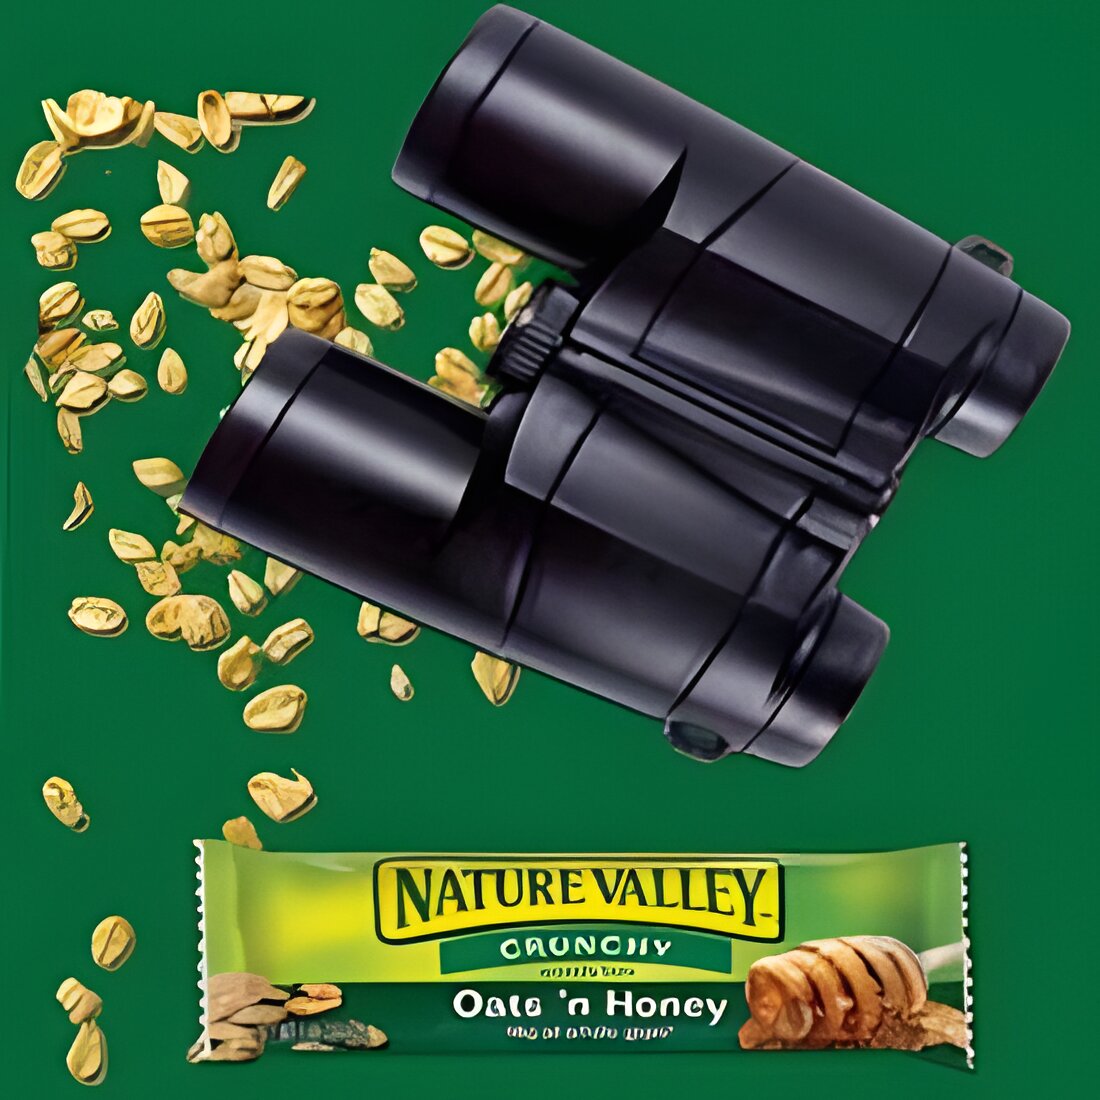 Free NATURE VALLEY Product Box